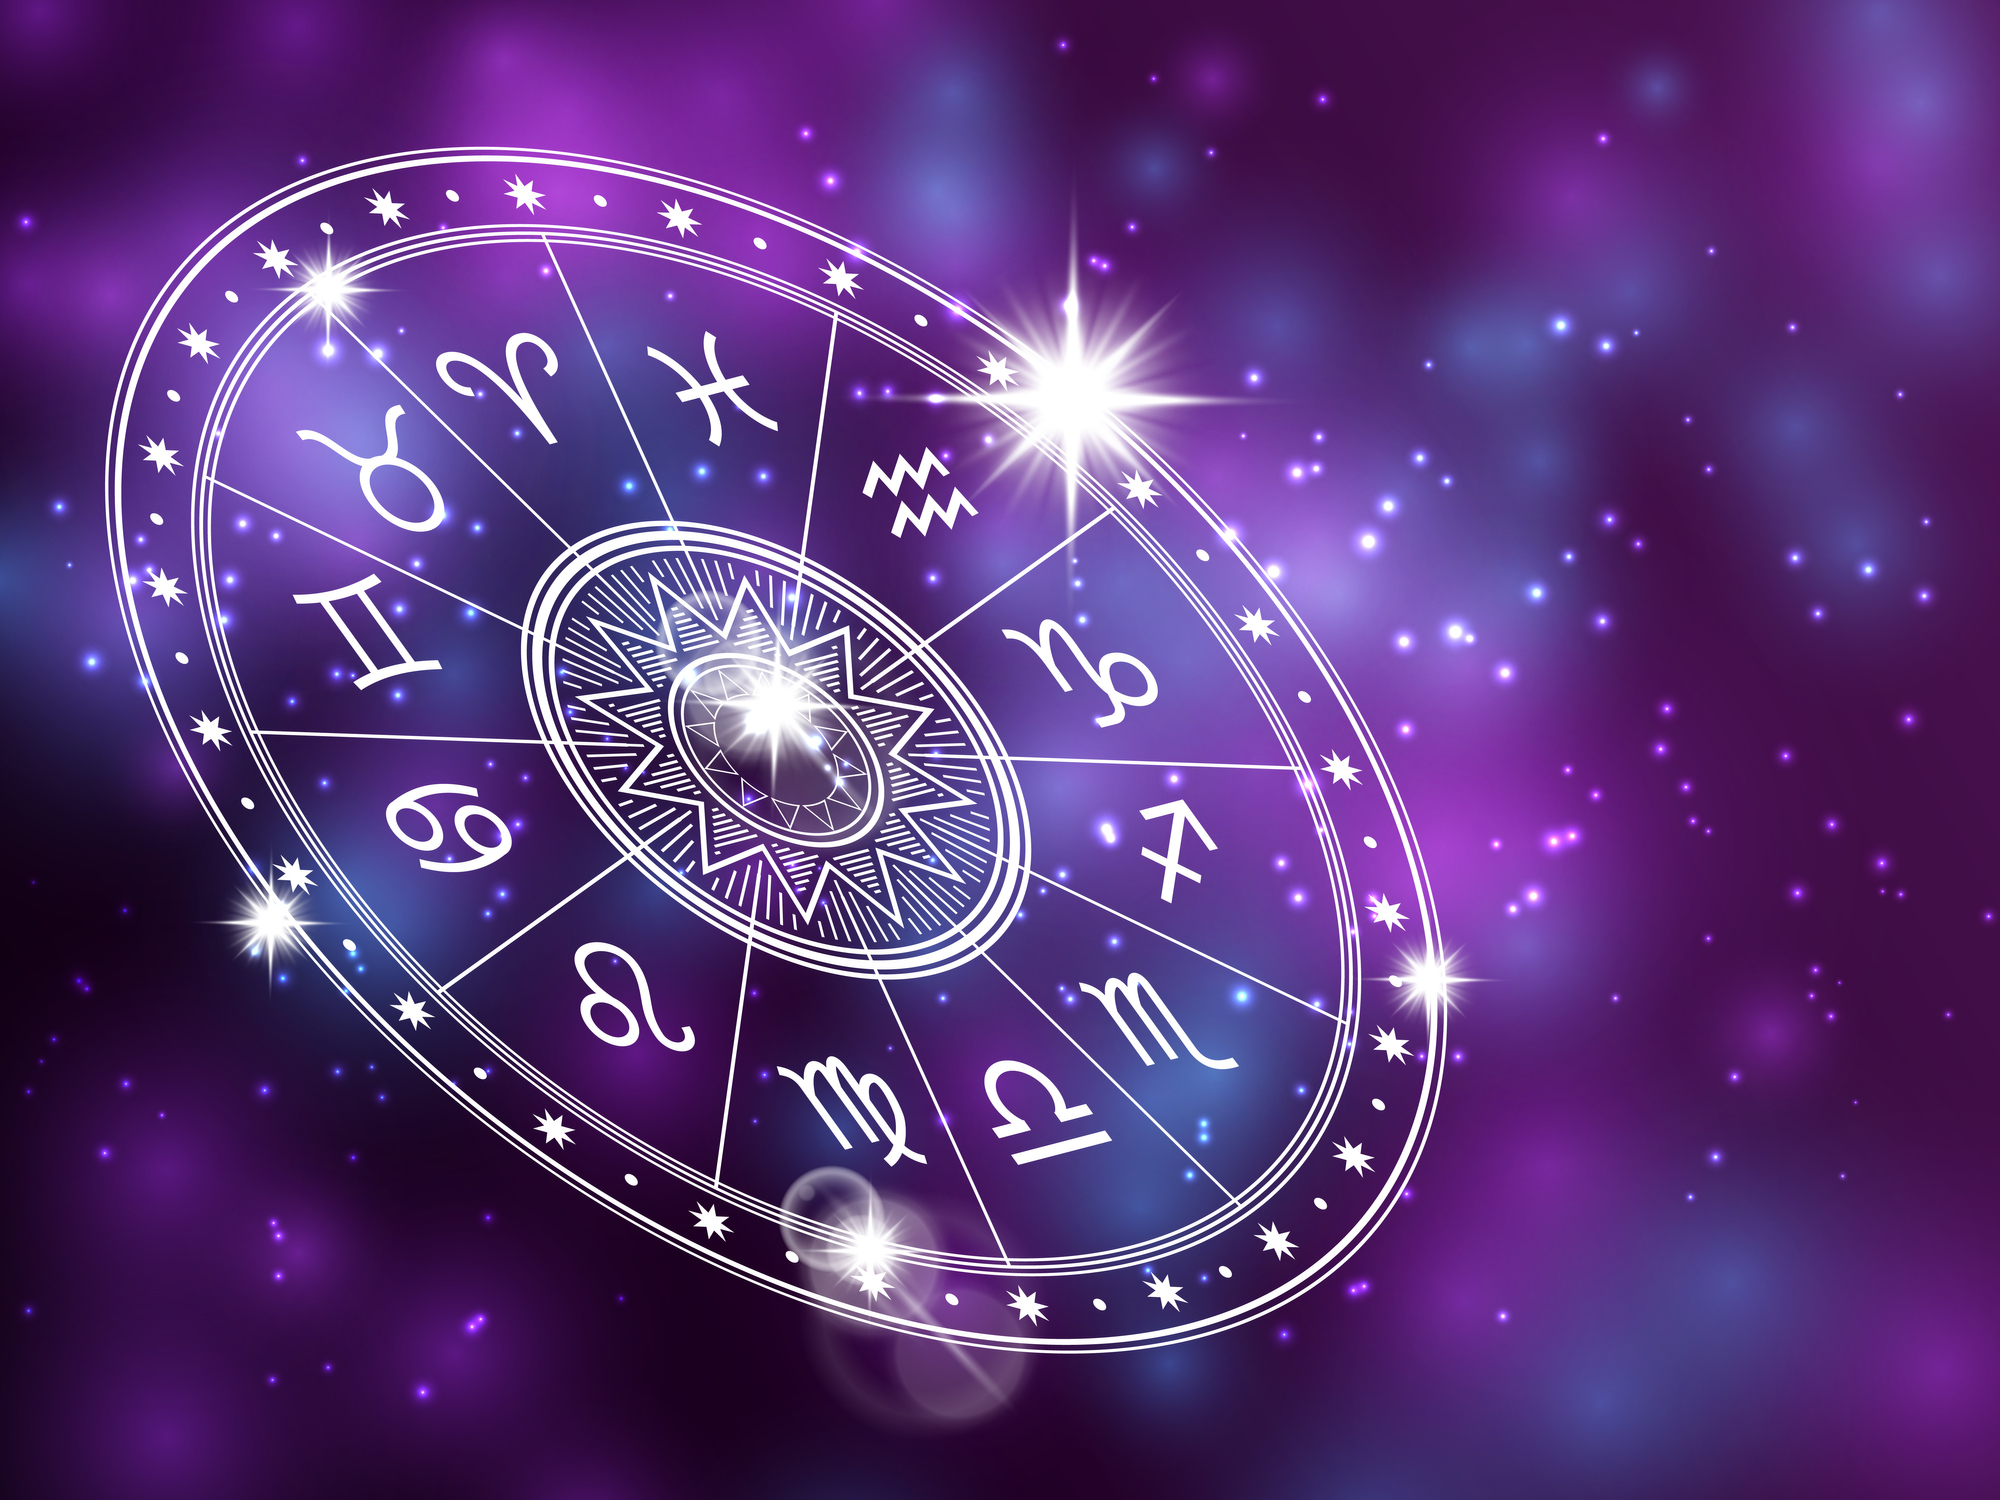 Astrology Houses: Charting Your Sign | Keen